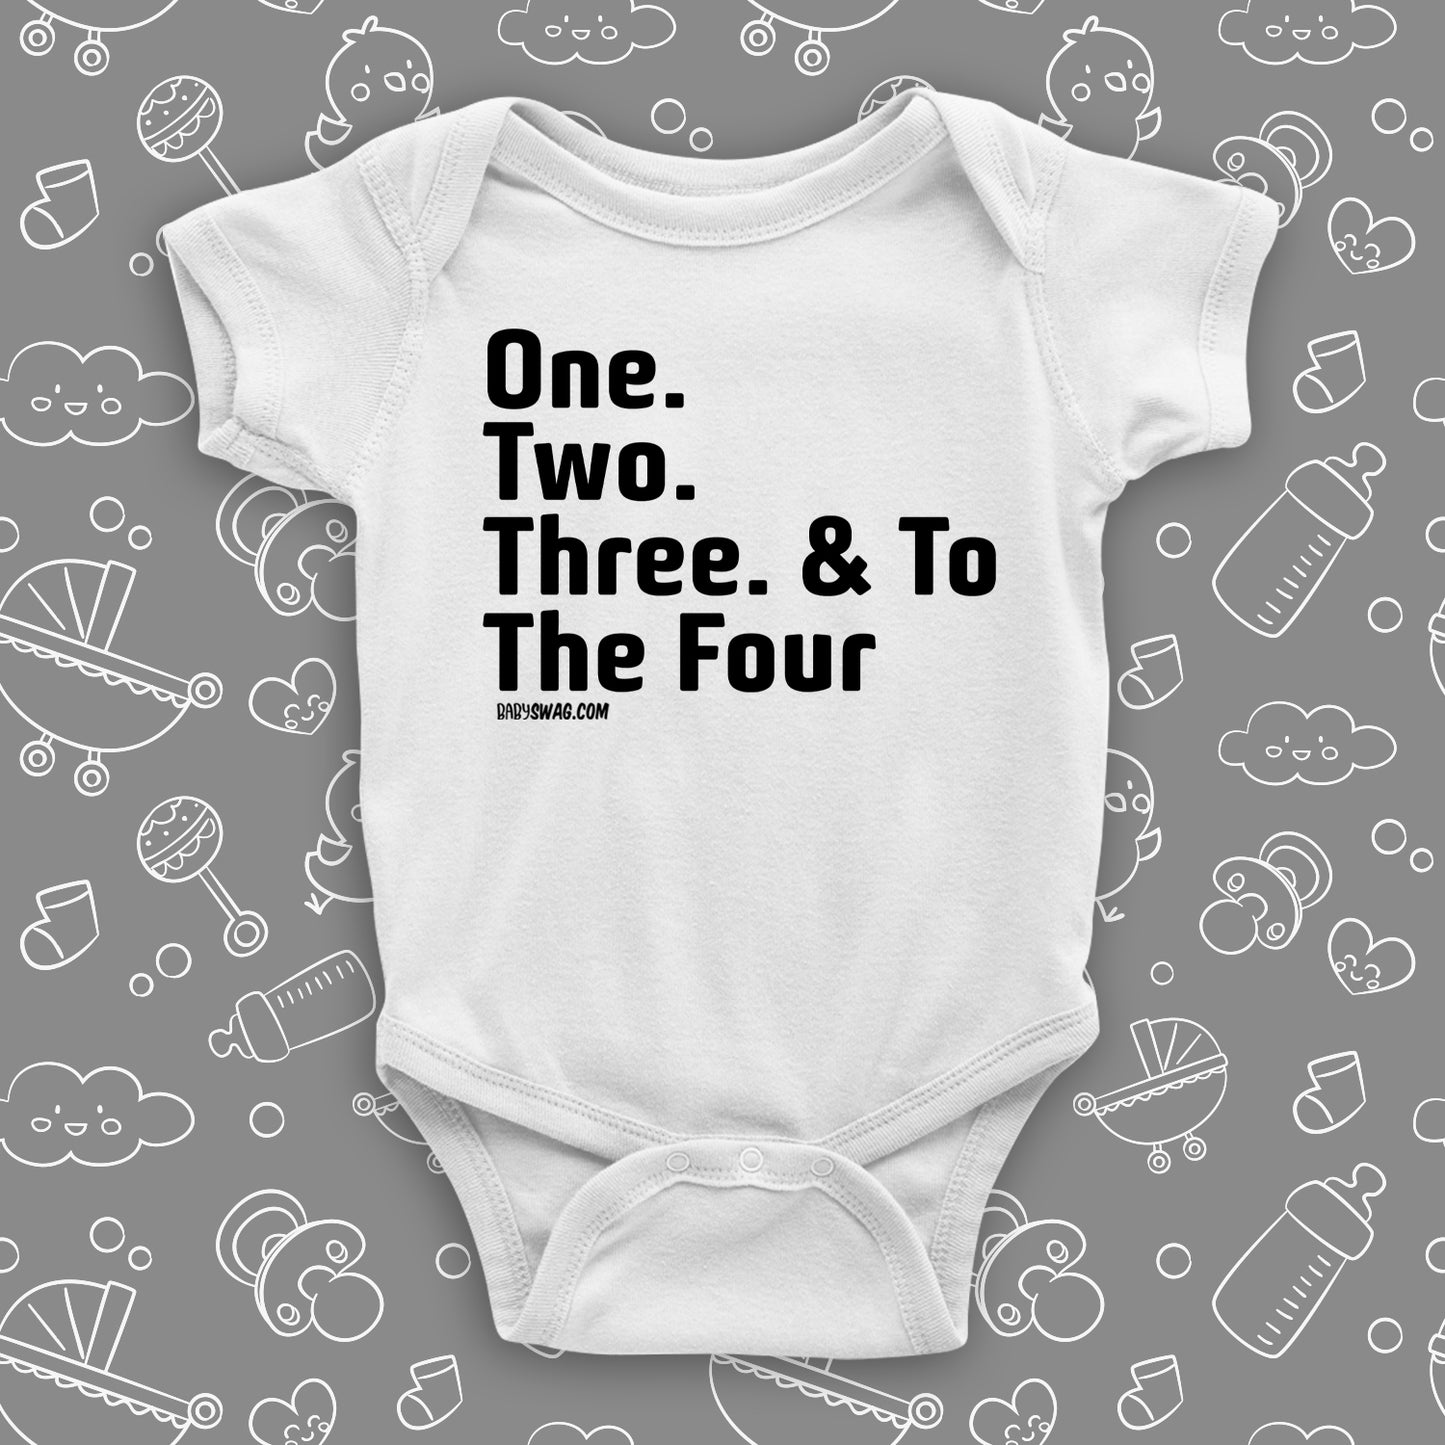 Cute baby onesies with saying "One Two Three & To The Four" in white.